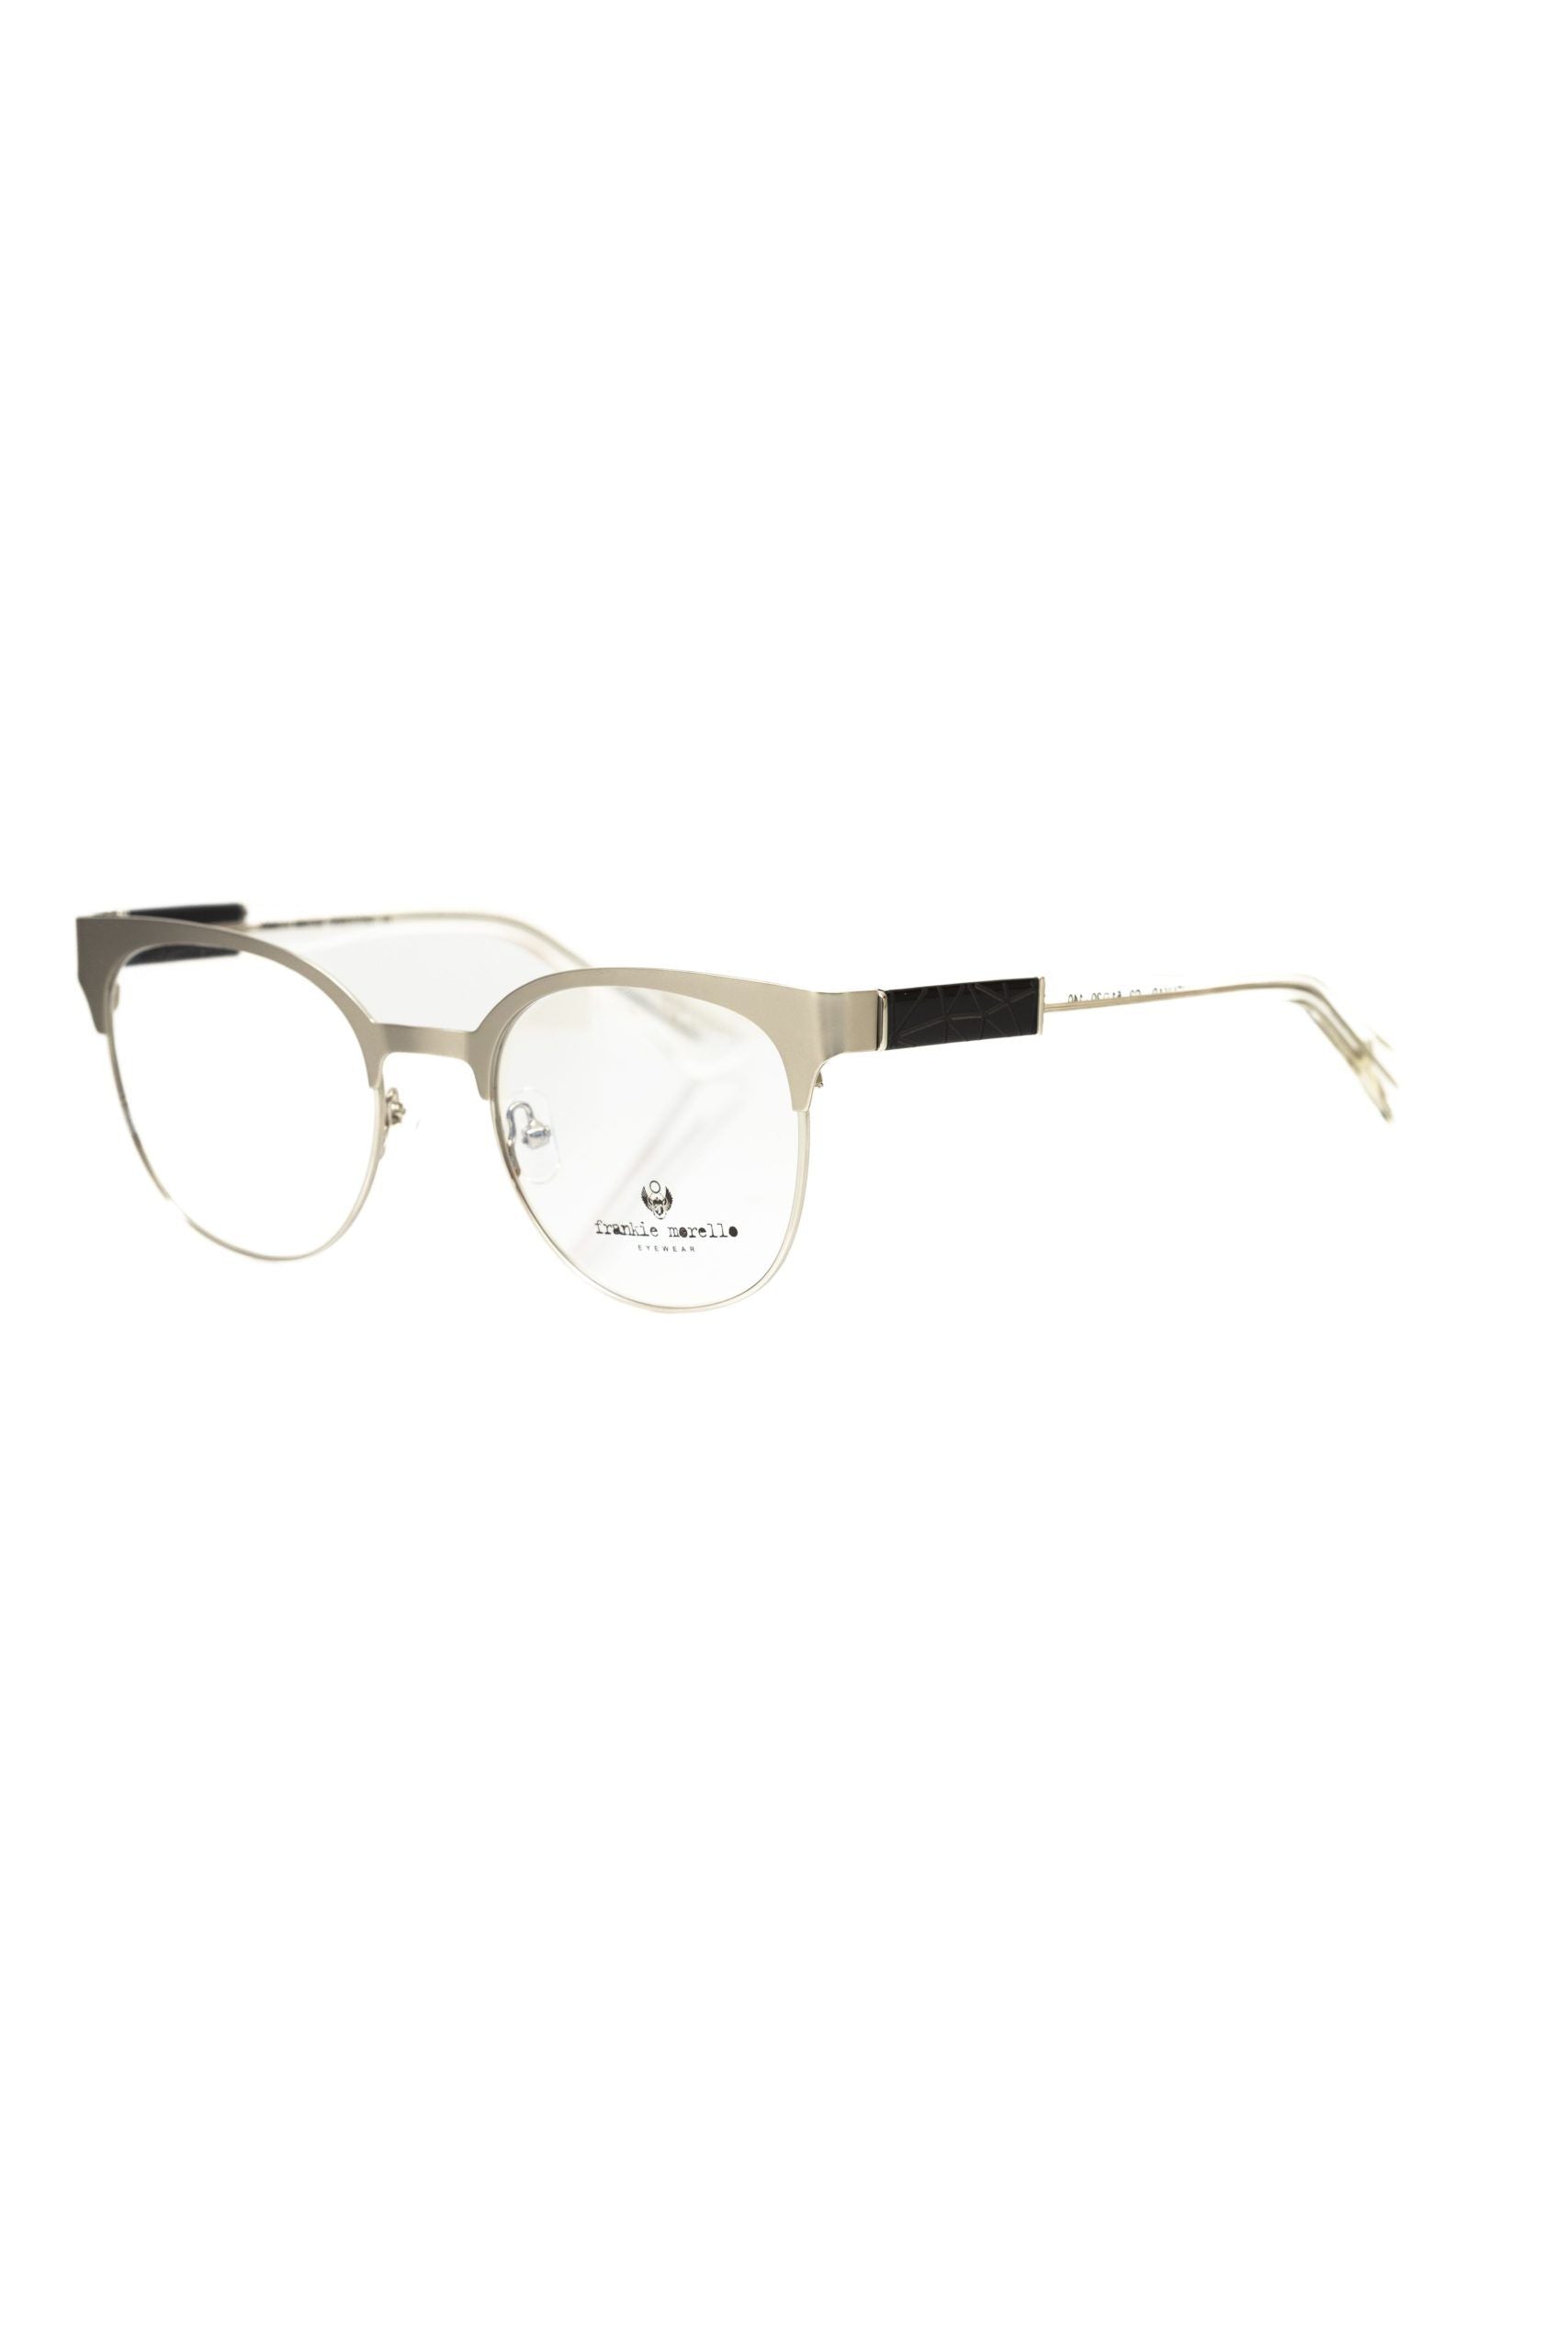 Frankie Morello FRMO-22120 Black Acetate Frames - Designed by Frankie Morello Available to Buy at a Discounted Price on Moon Behind The Hill Online Designer Discount Store